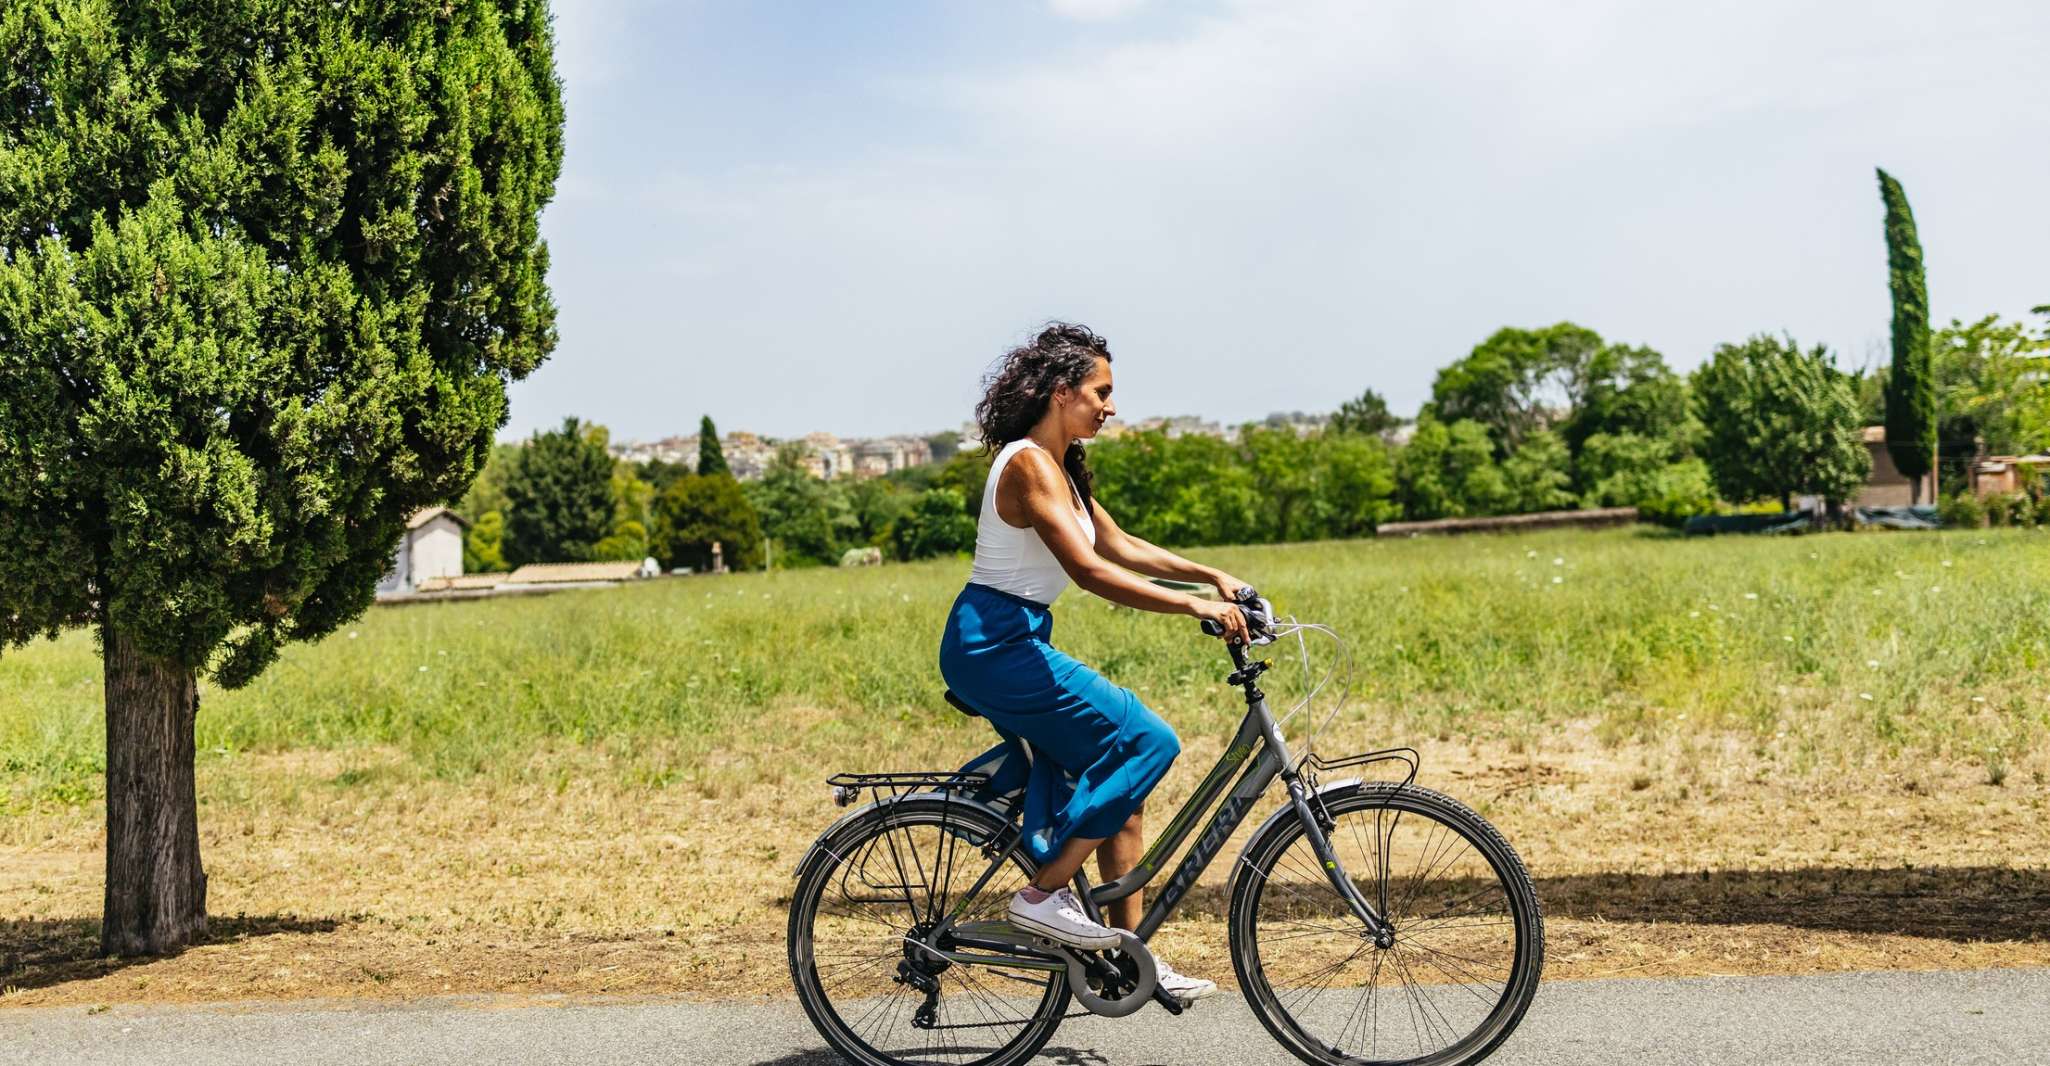 Appia Antica, Full Day Bike Rental with Customizable Routes - Housity